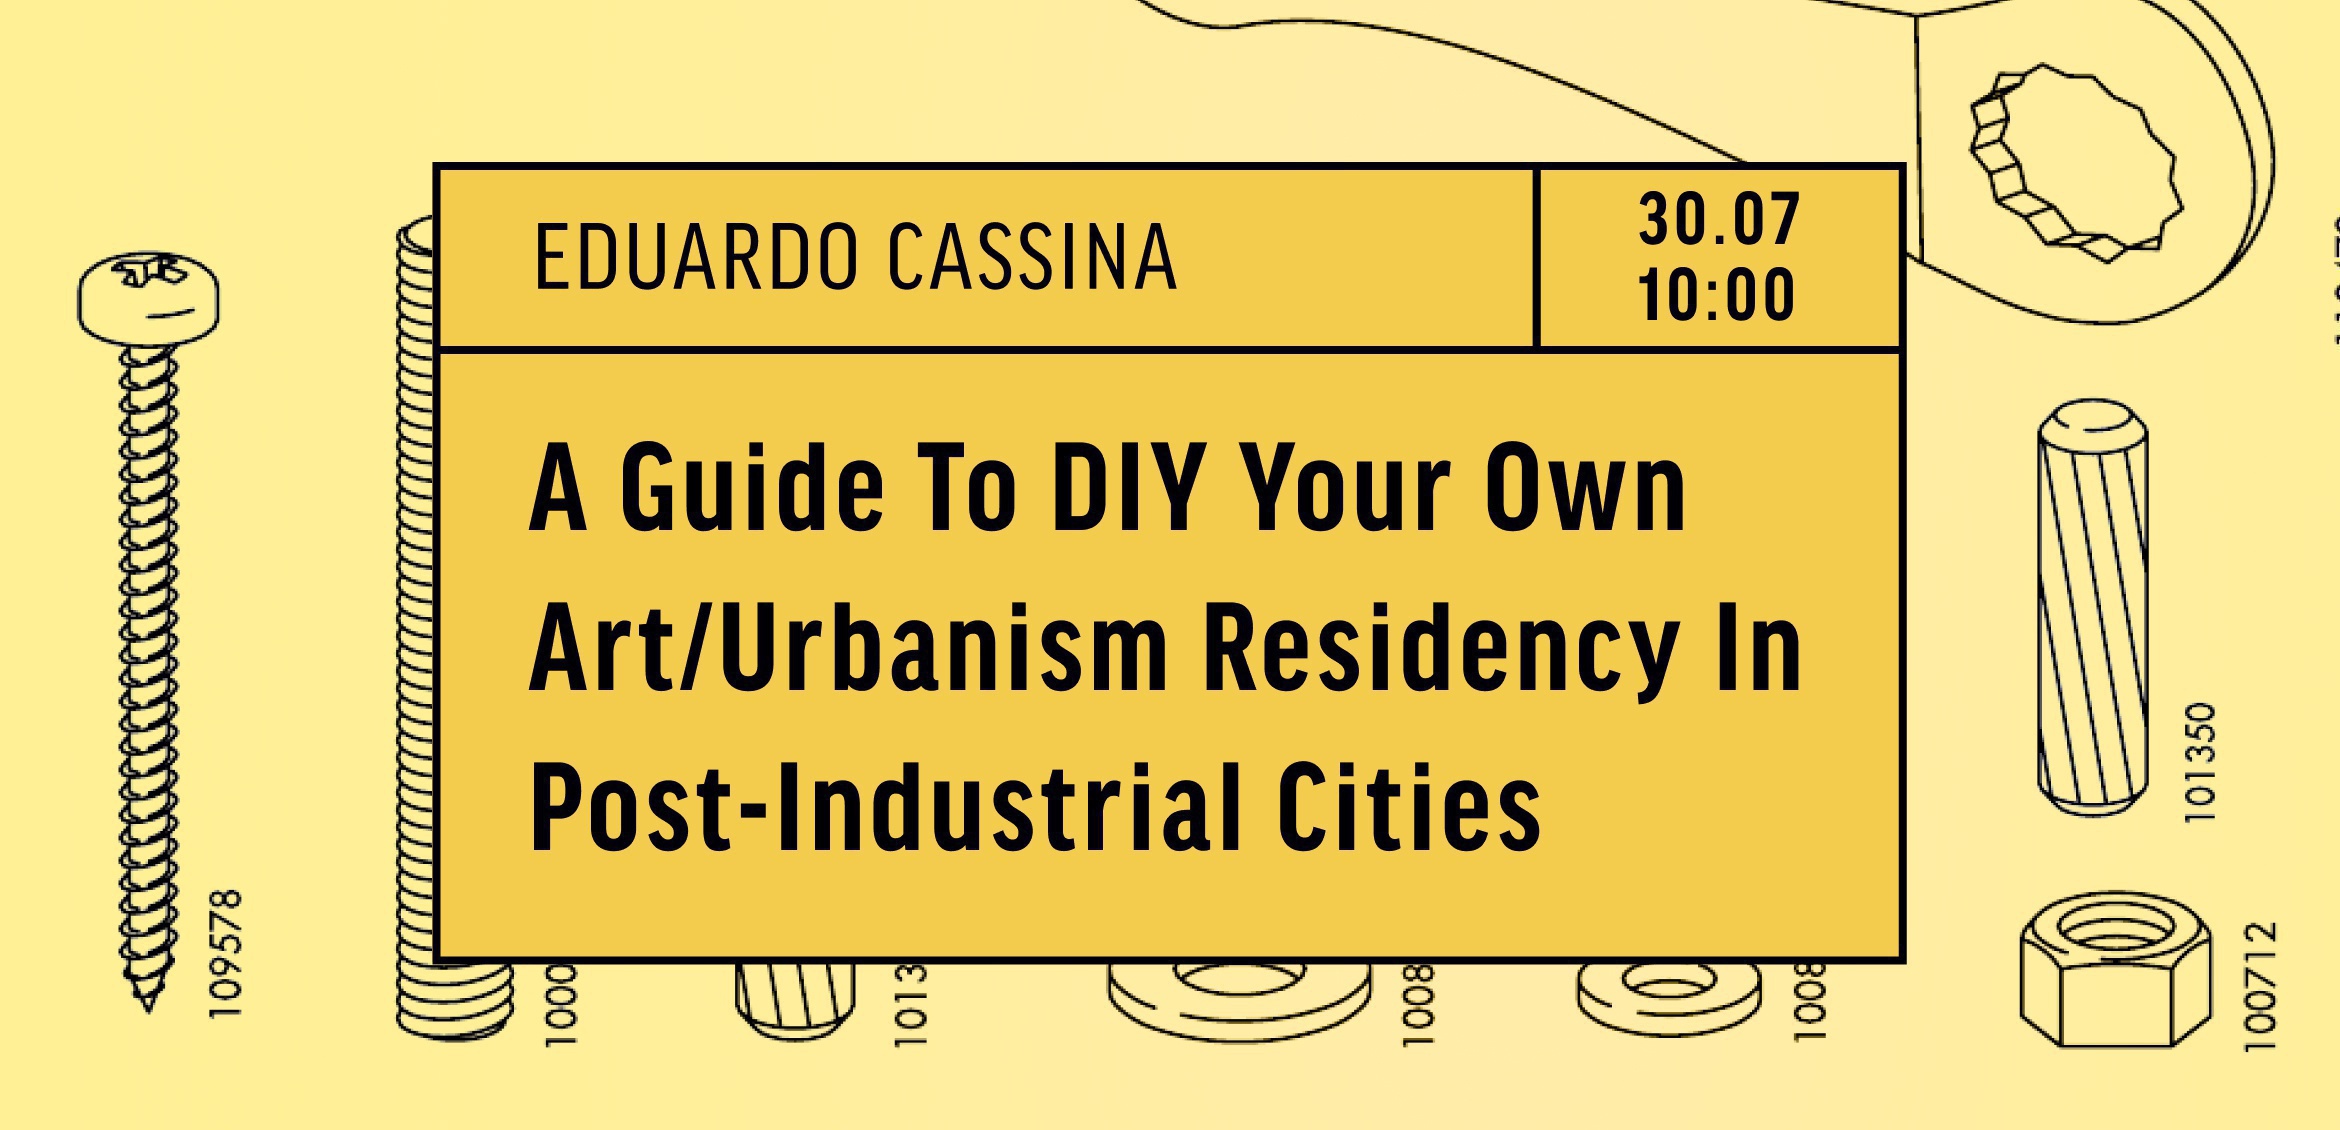 TO RESIDENCY: a guide to DIY your own art/urbanism residency in post-industrial cities